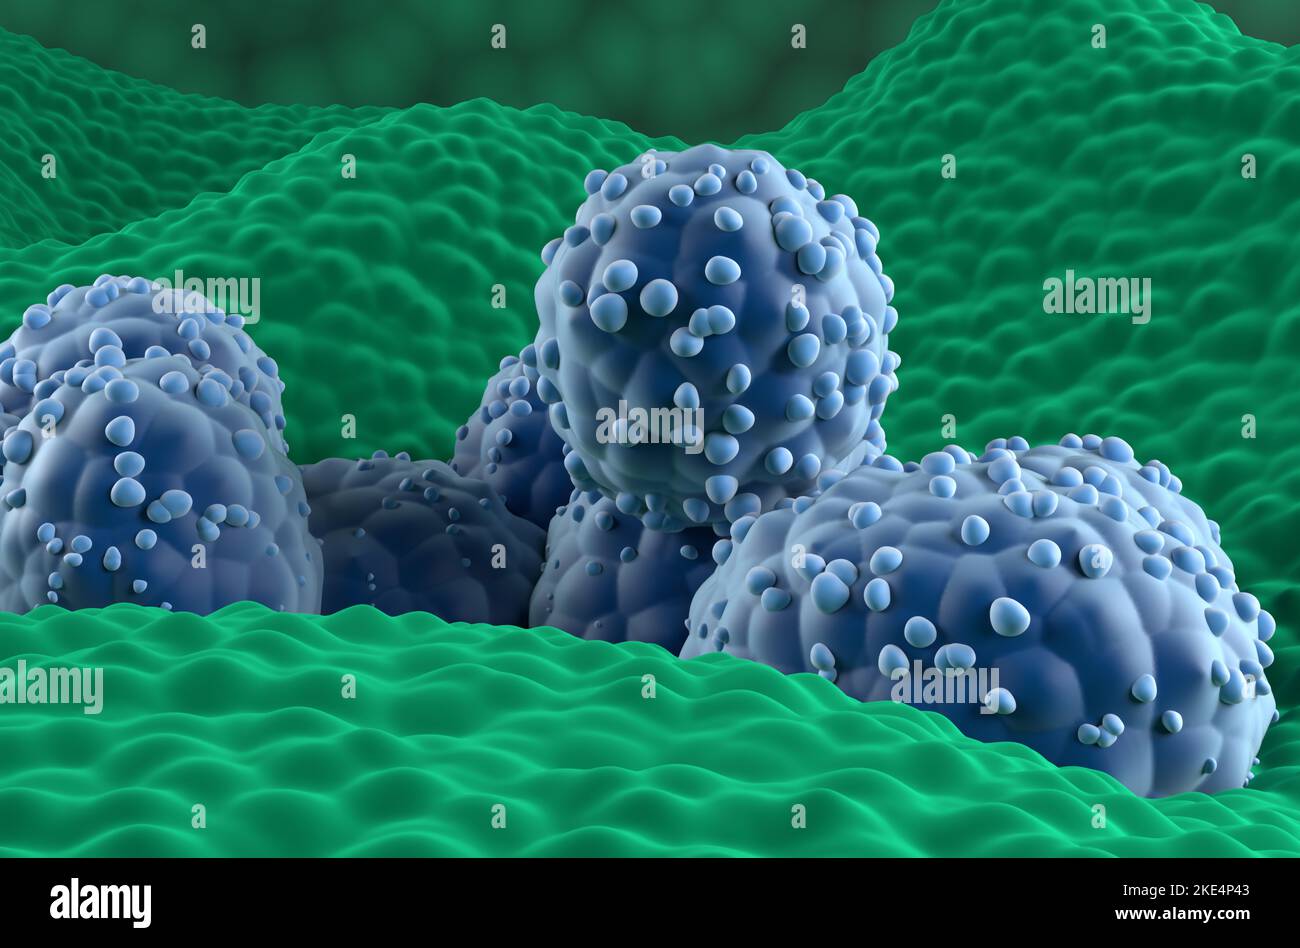 Prostate cancer cells in the prostatic glandular epithelium - closeup view 3d illustration Stock Photo